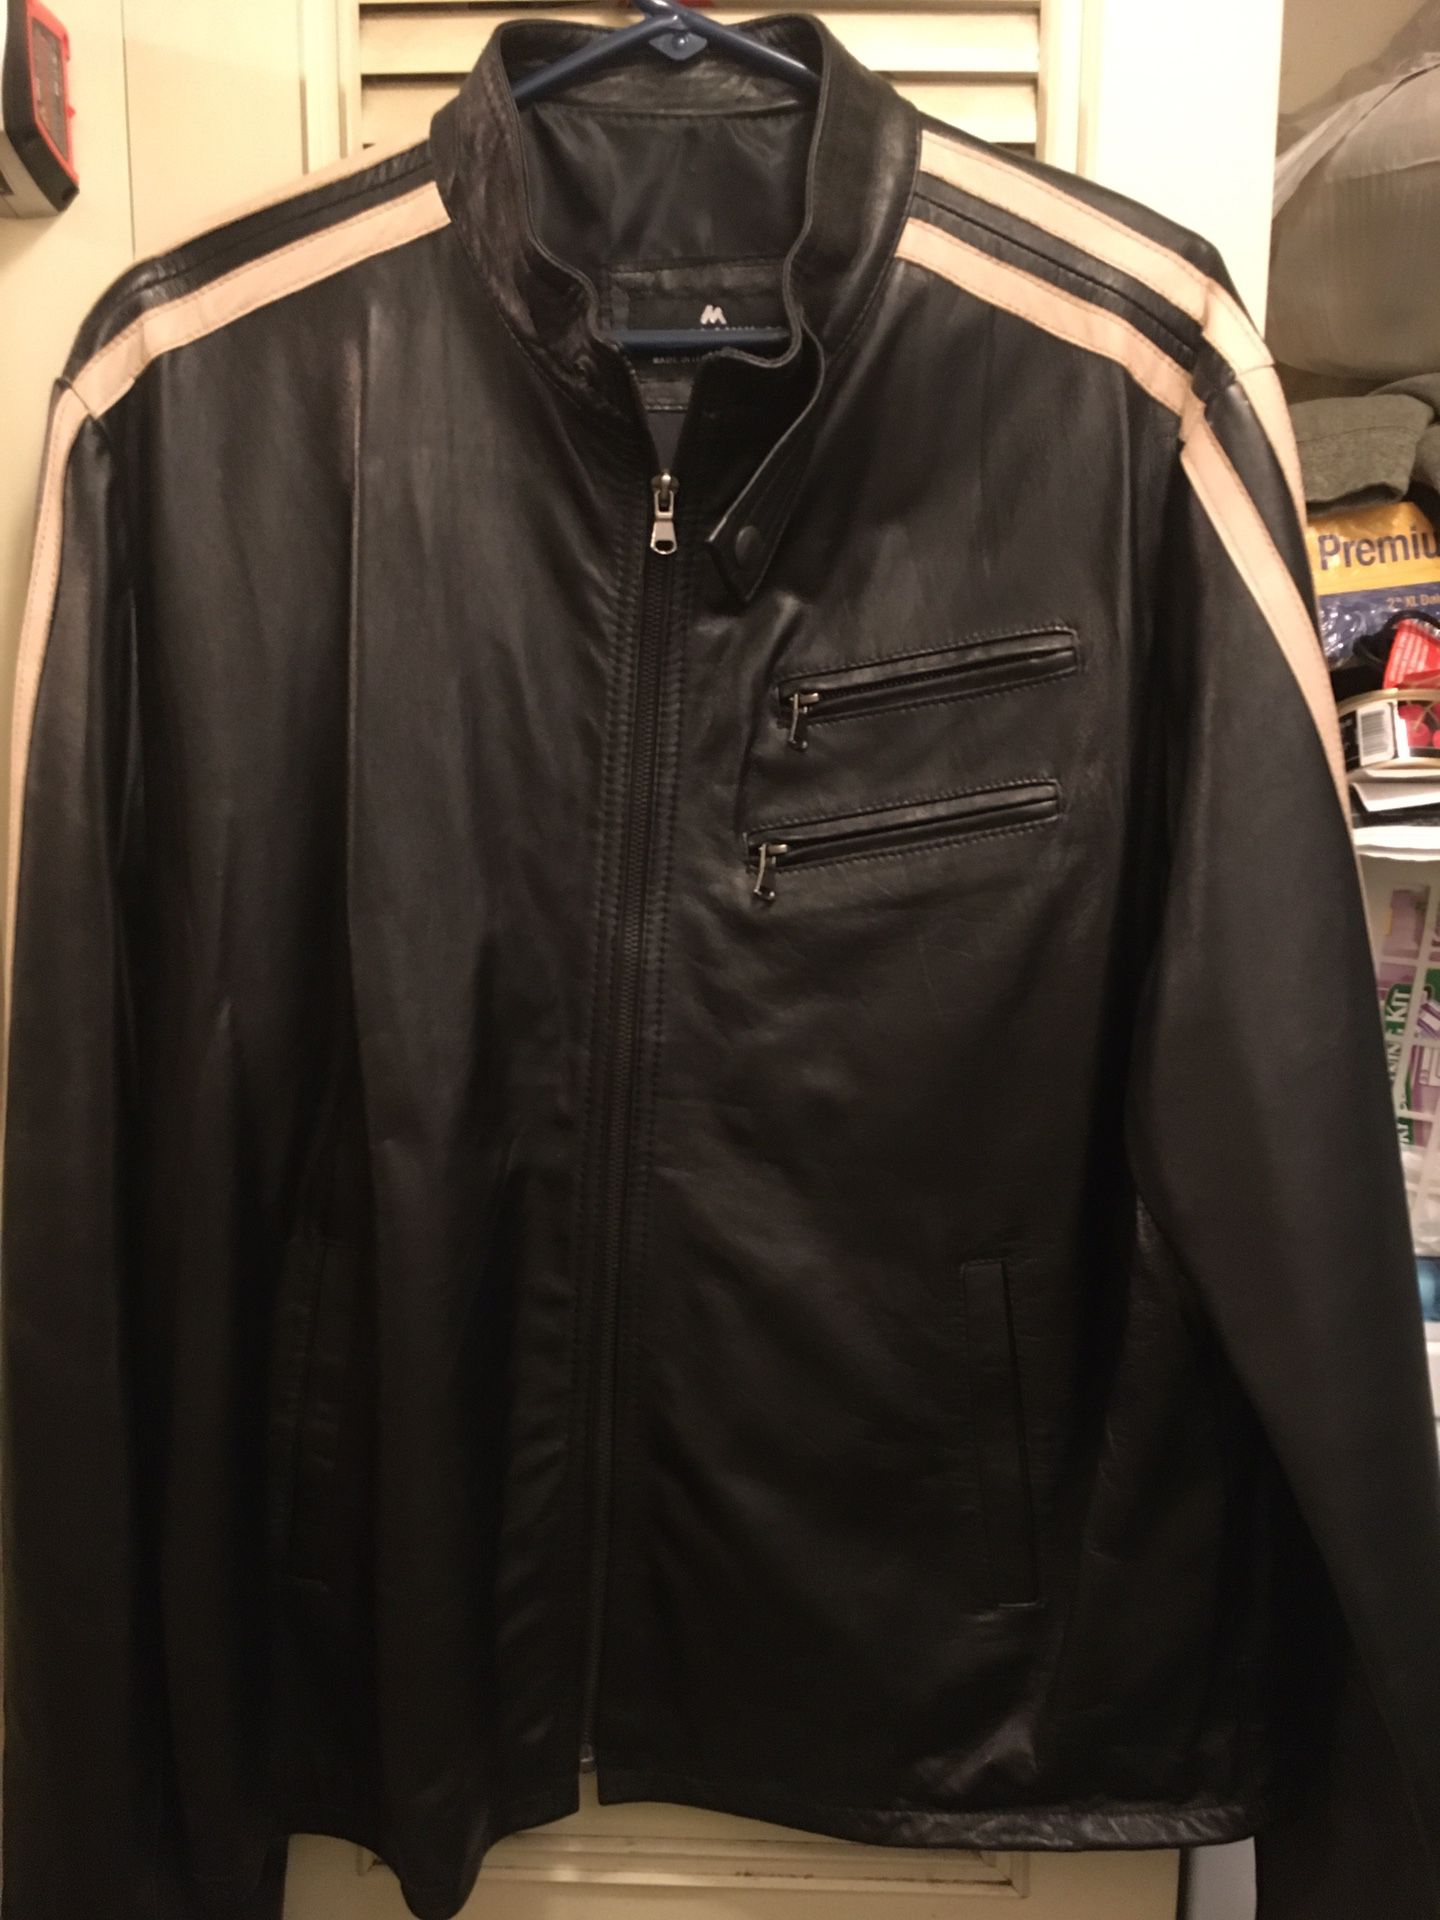 New large leather riding jacket only $45 firm